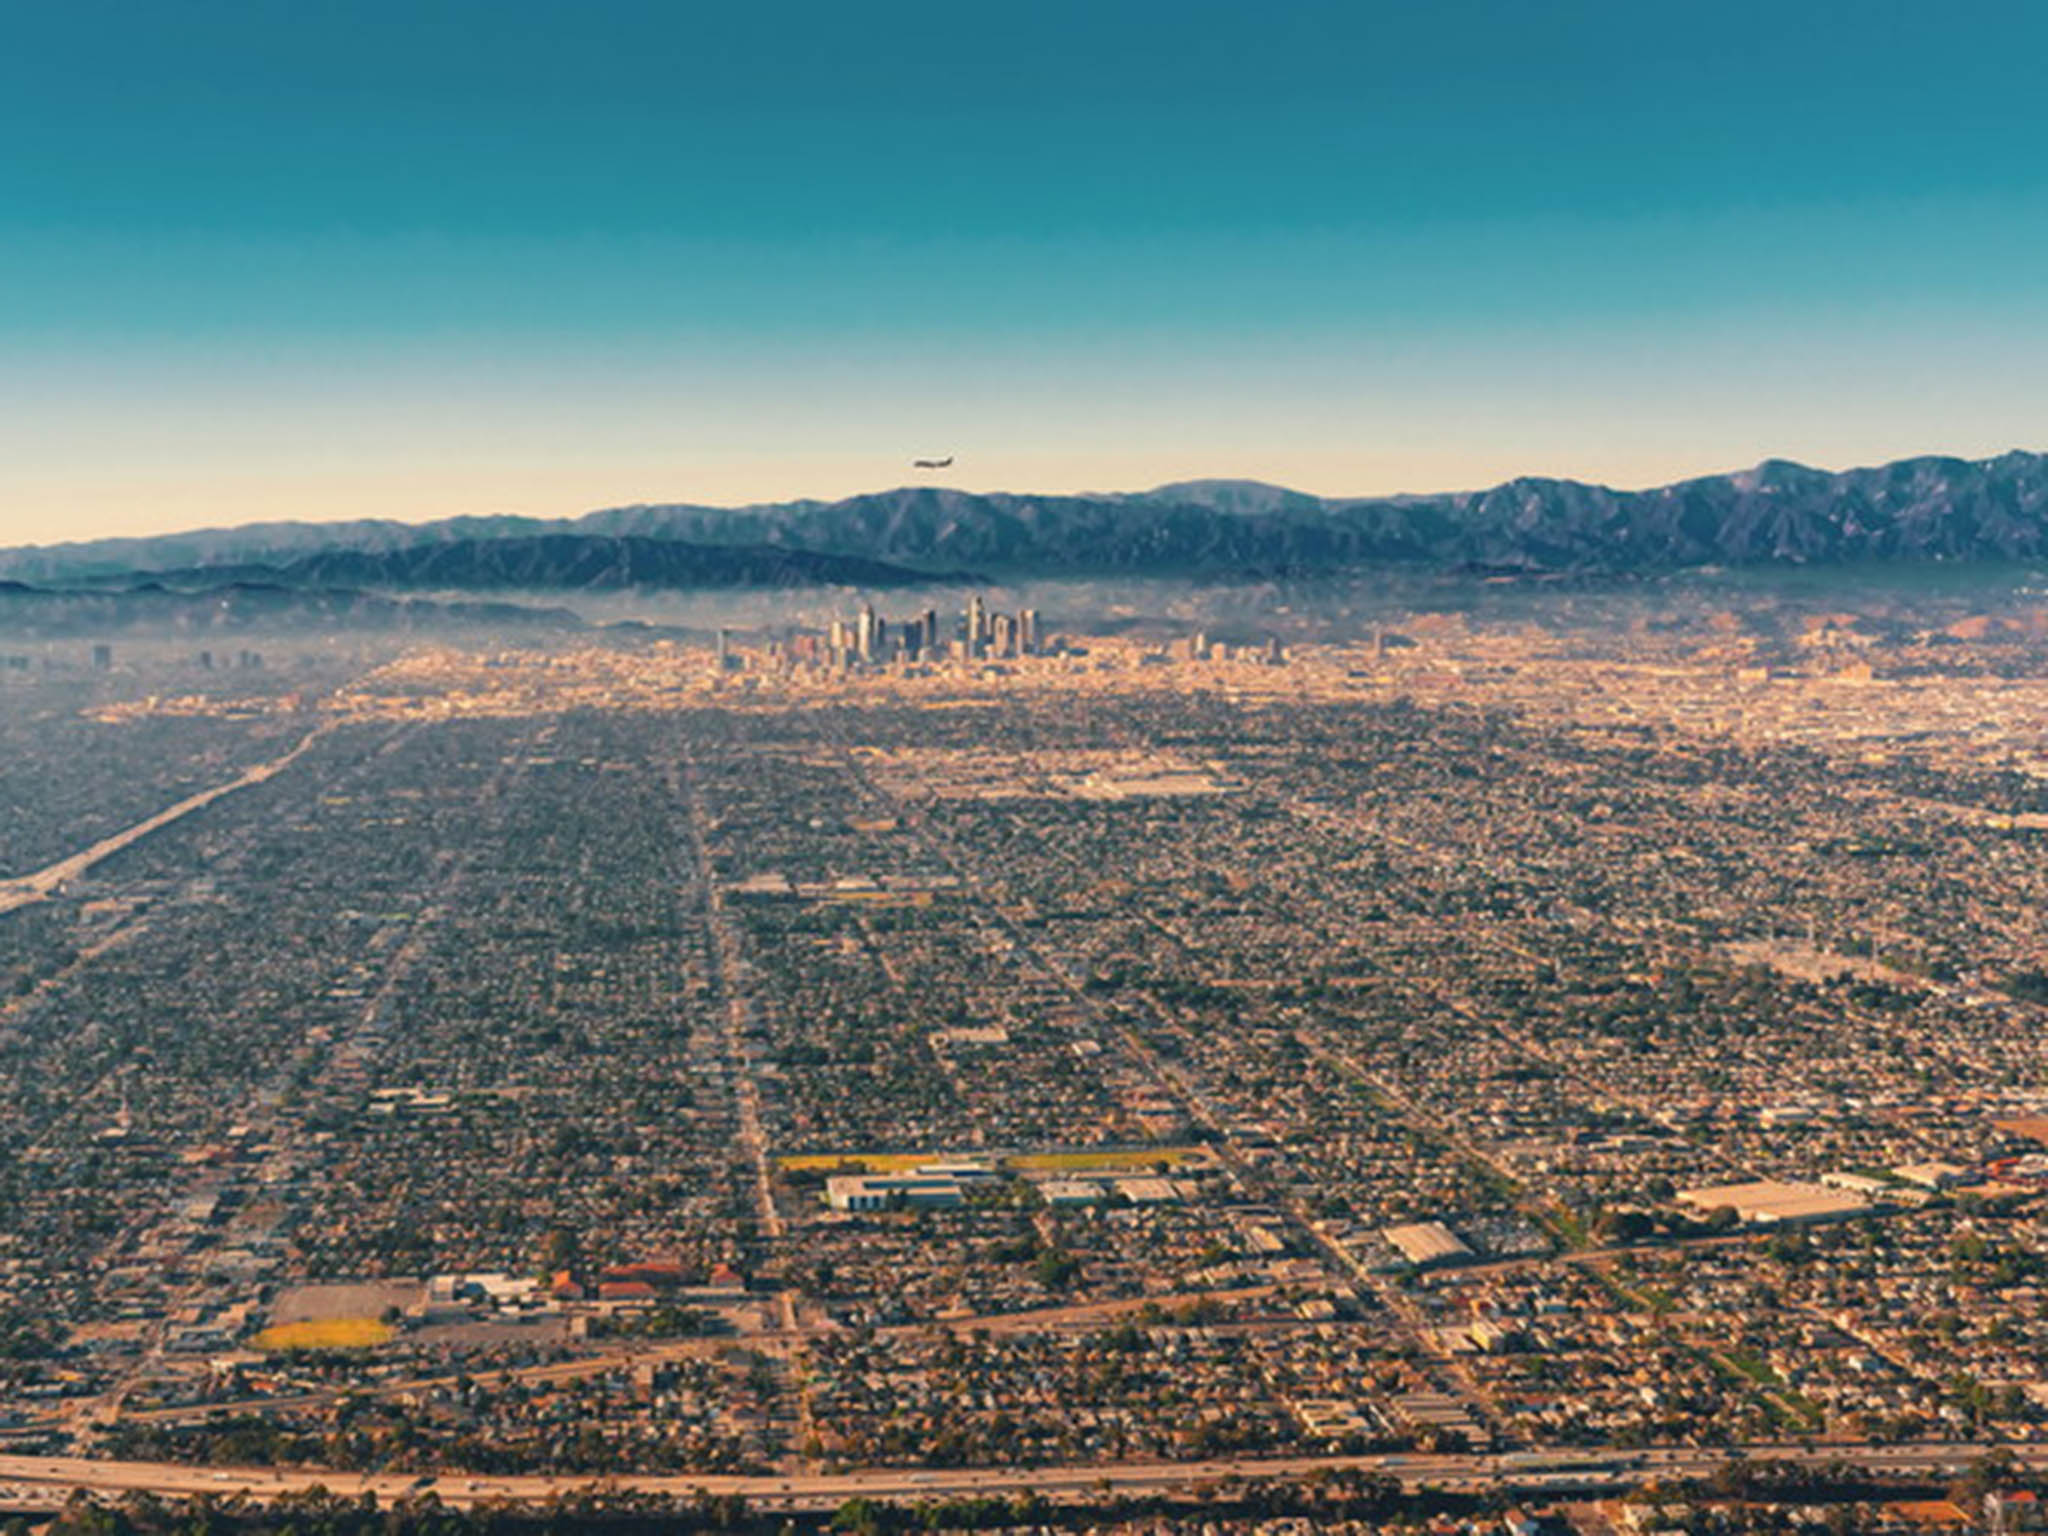 Sprawling cities like Los Angeles could cover an even larger area